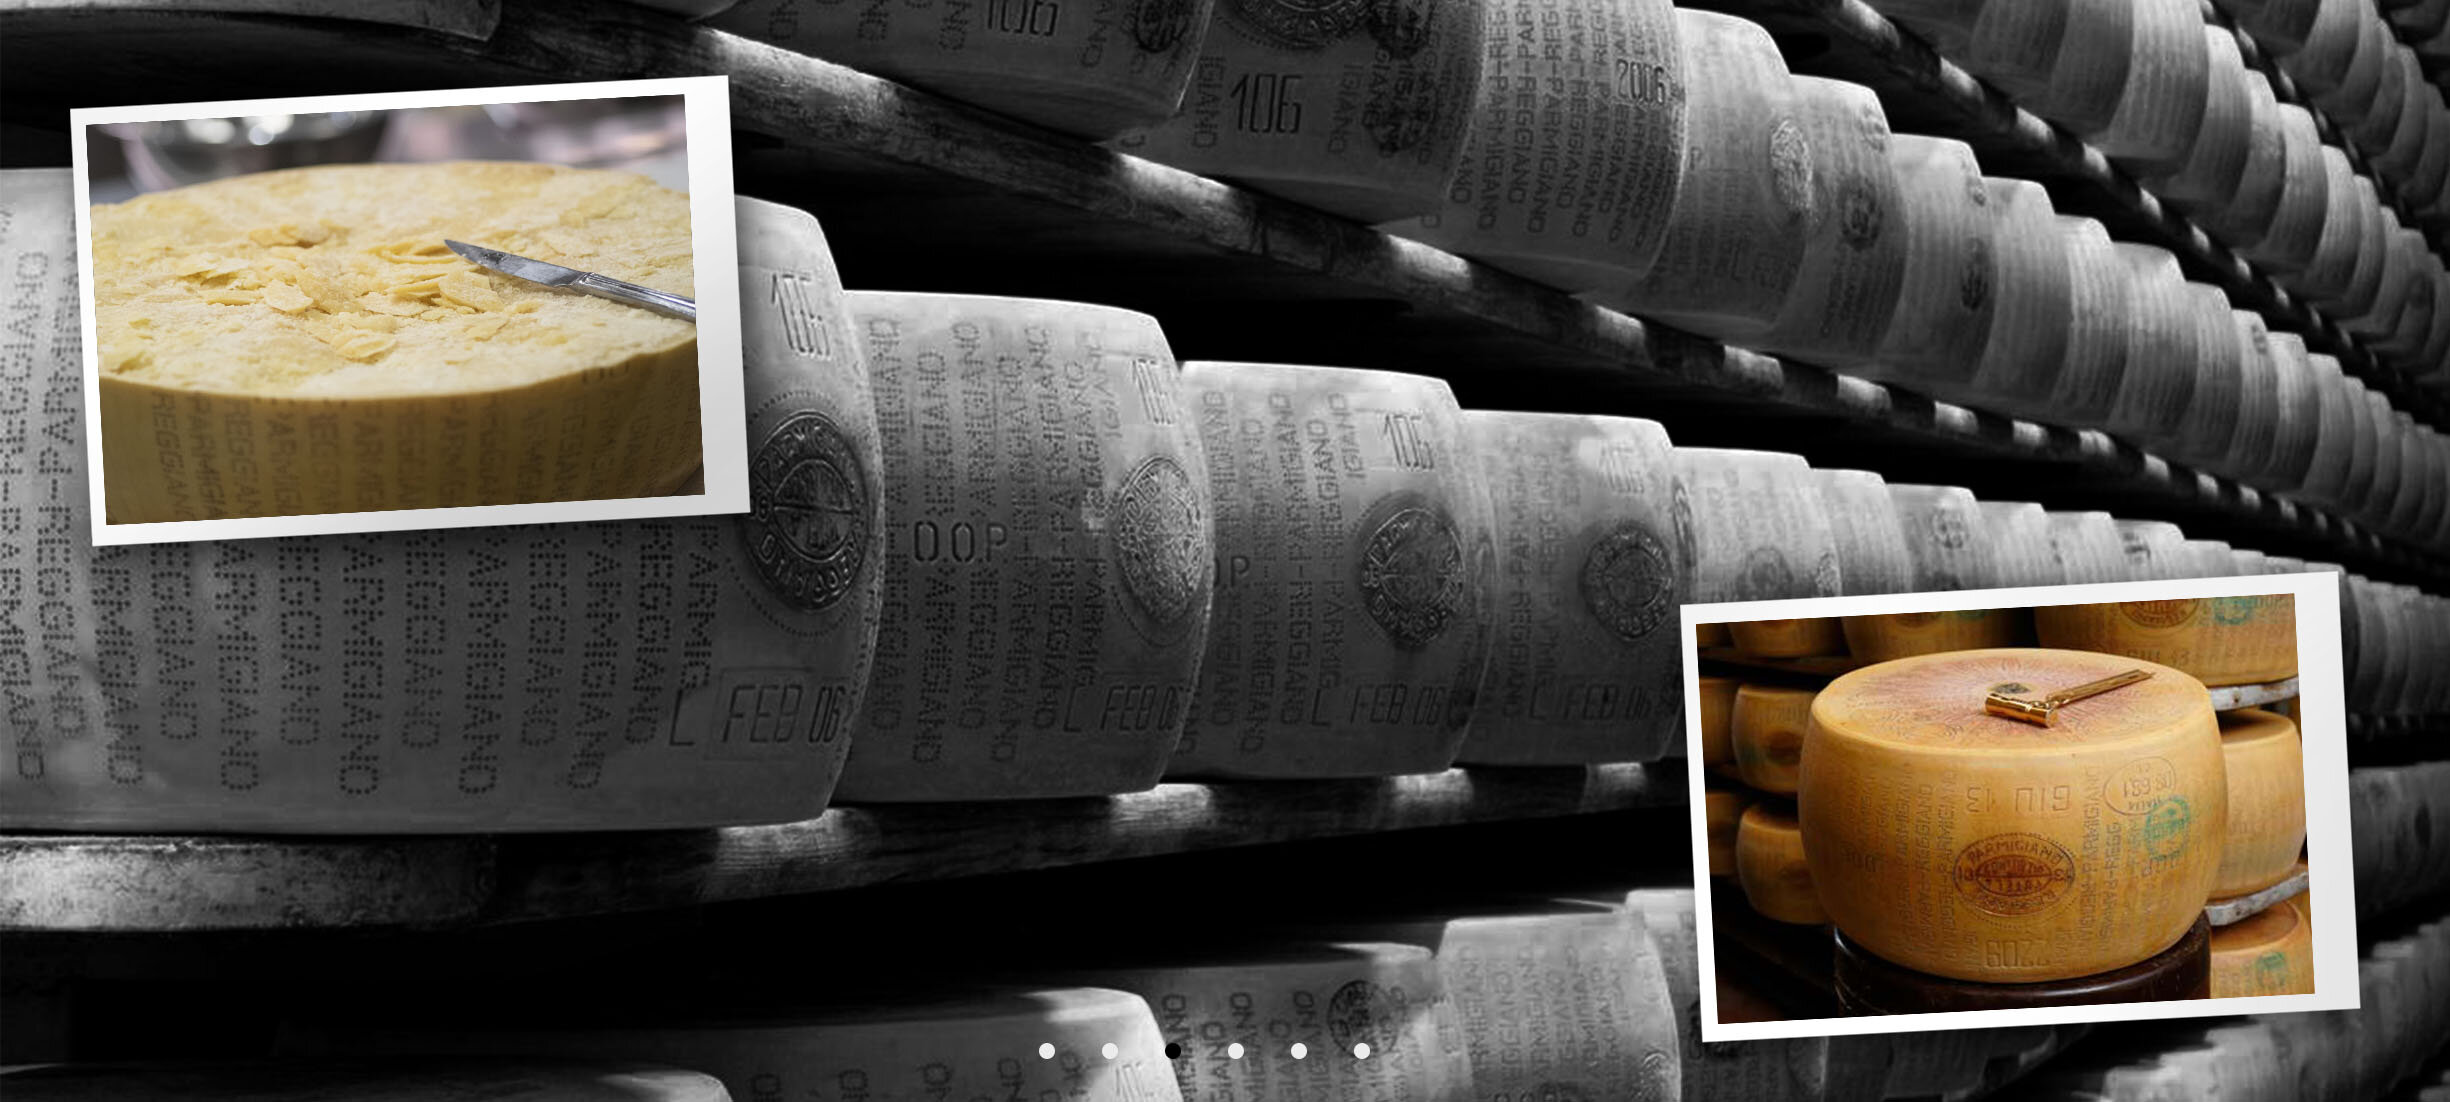  The wheels spend 24 months maturing in cellars. It is at this critical juncture that WHITE GOLDTM Parmigiano Reggiano reaches its optimal level of maturation bursting with flavor and aroma that distinguish this superb cheese. 